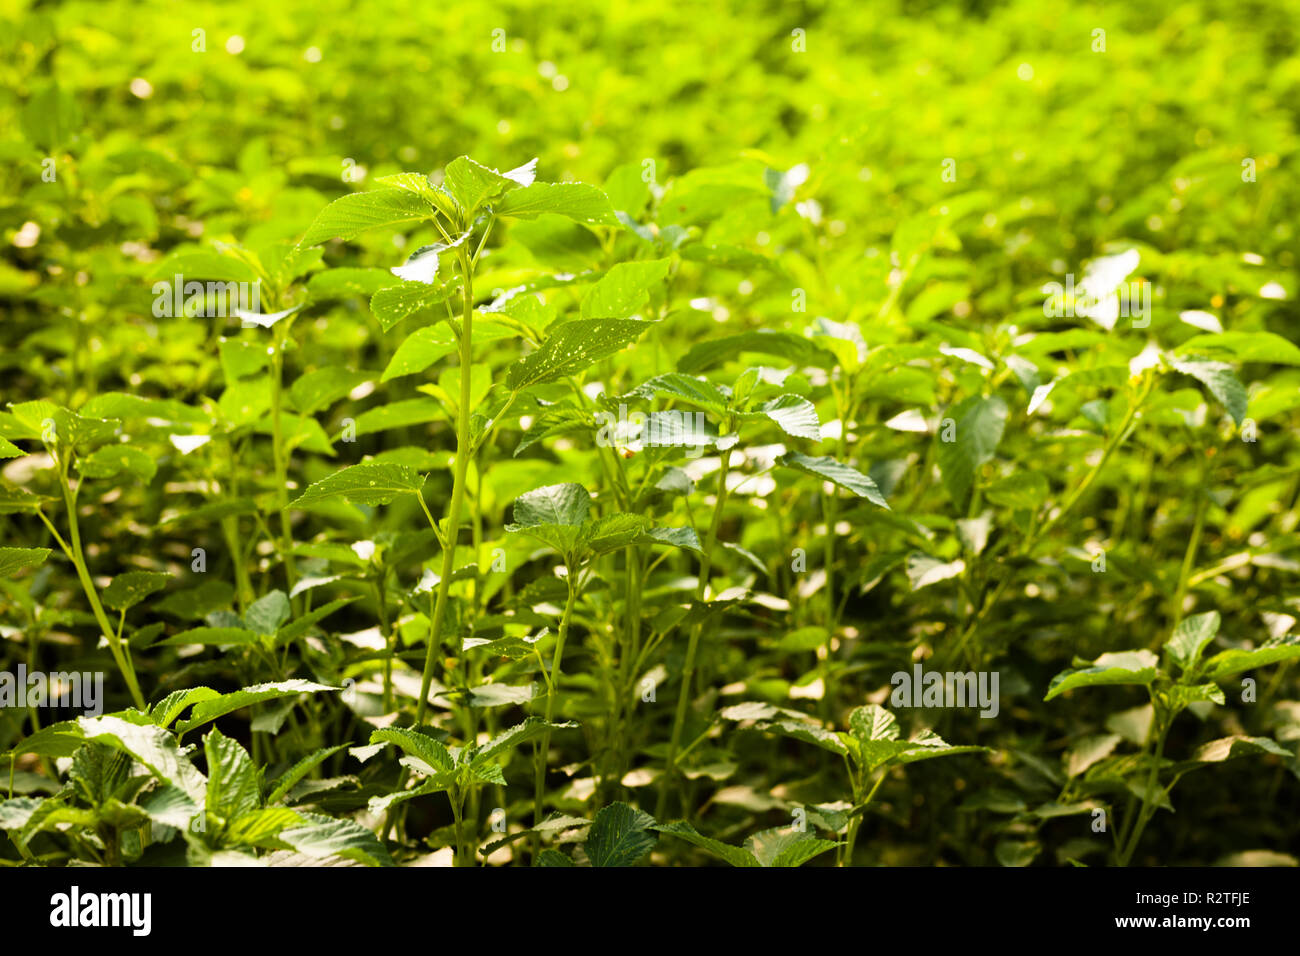 View of plantation of white jute in sunny greenhouse Stock Photo